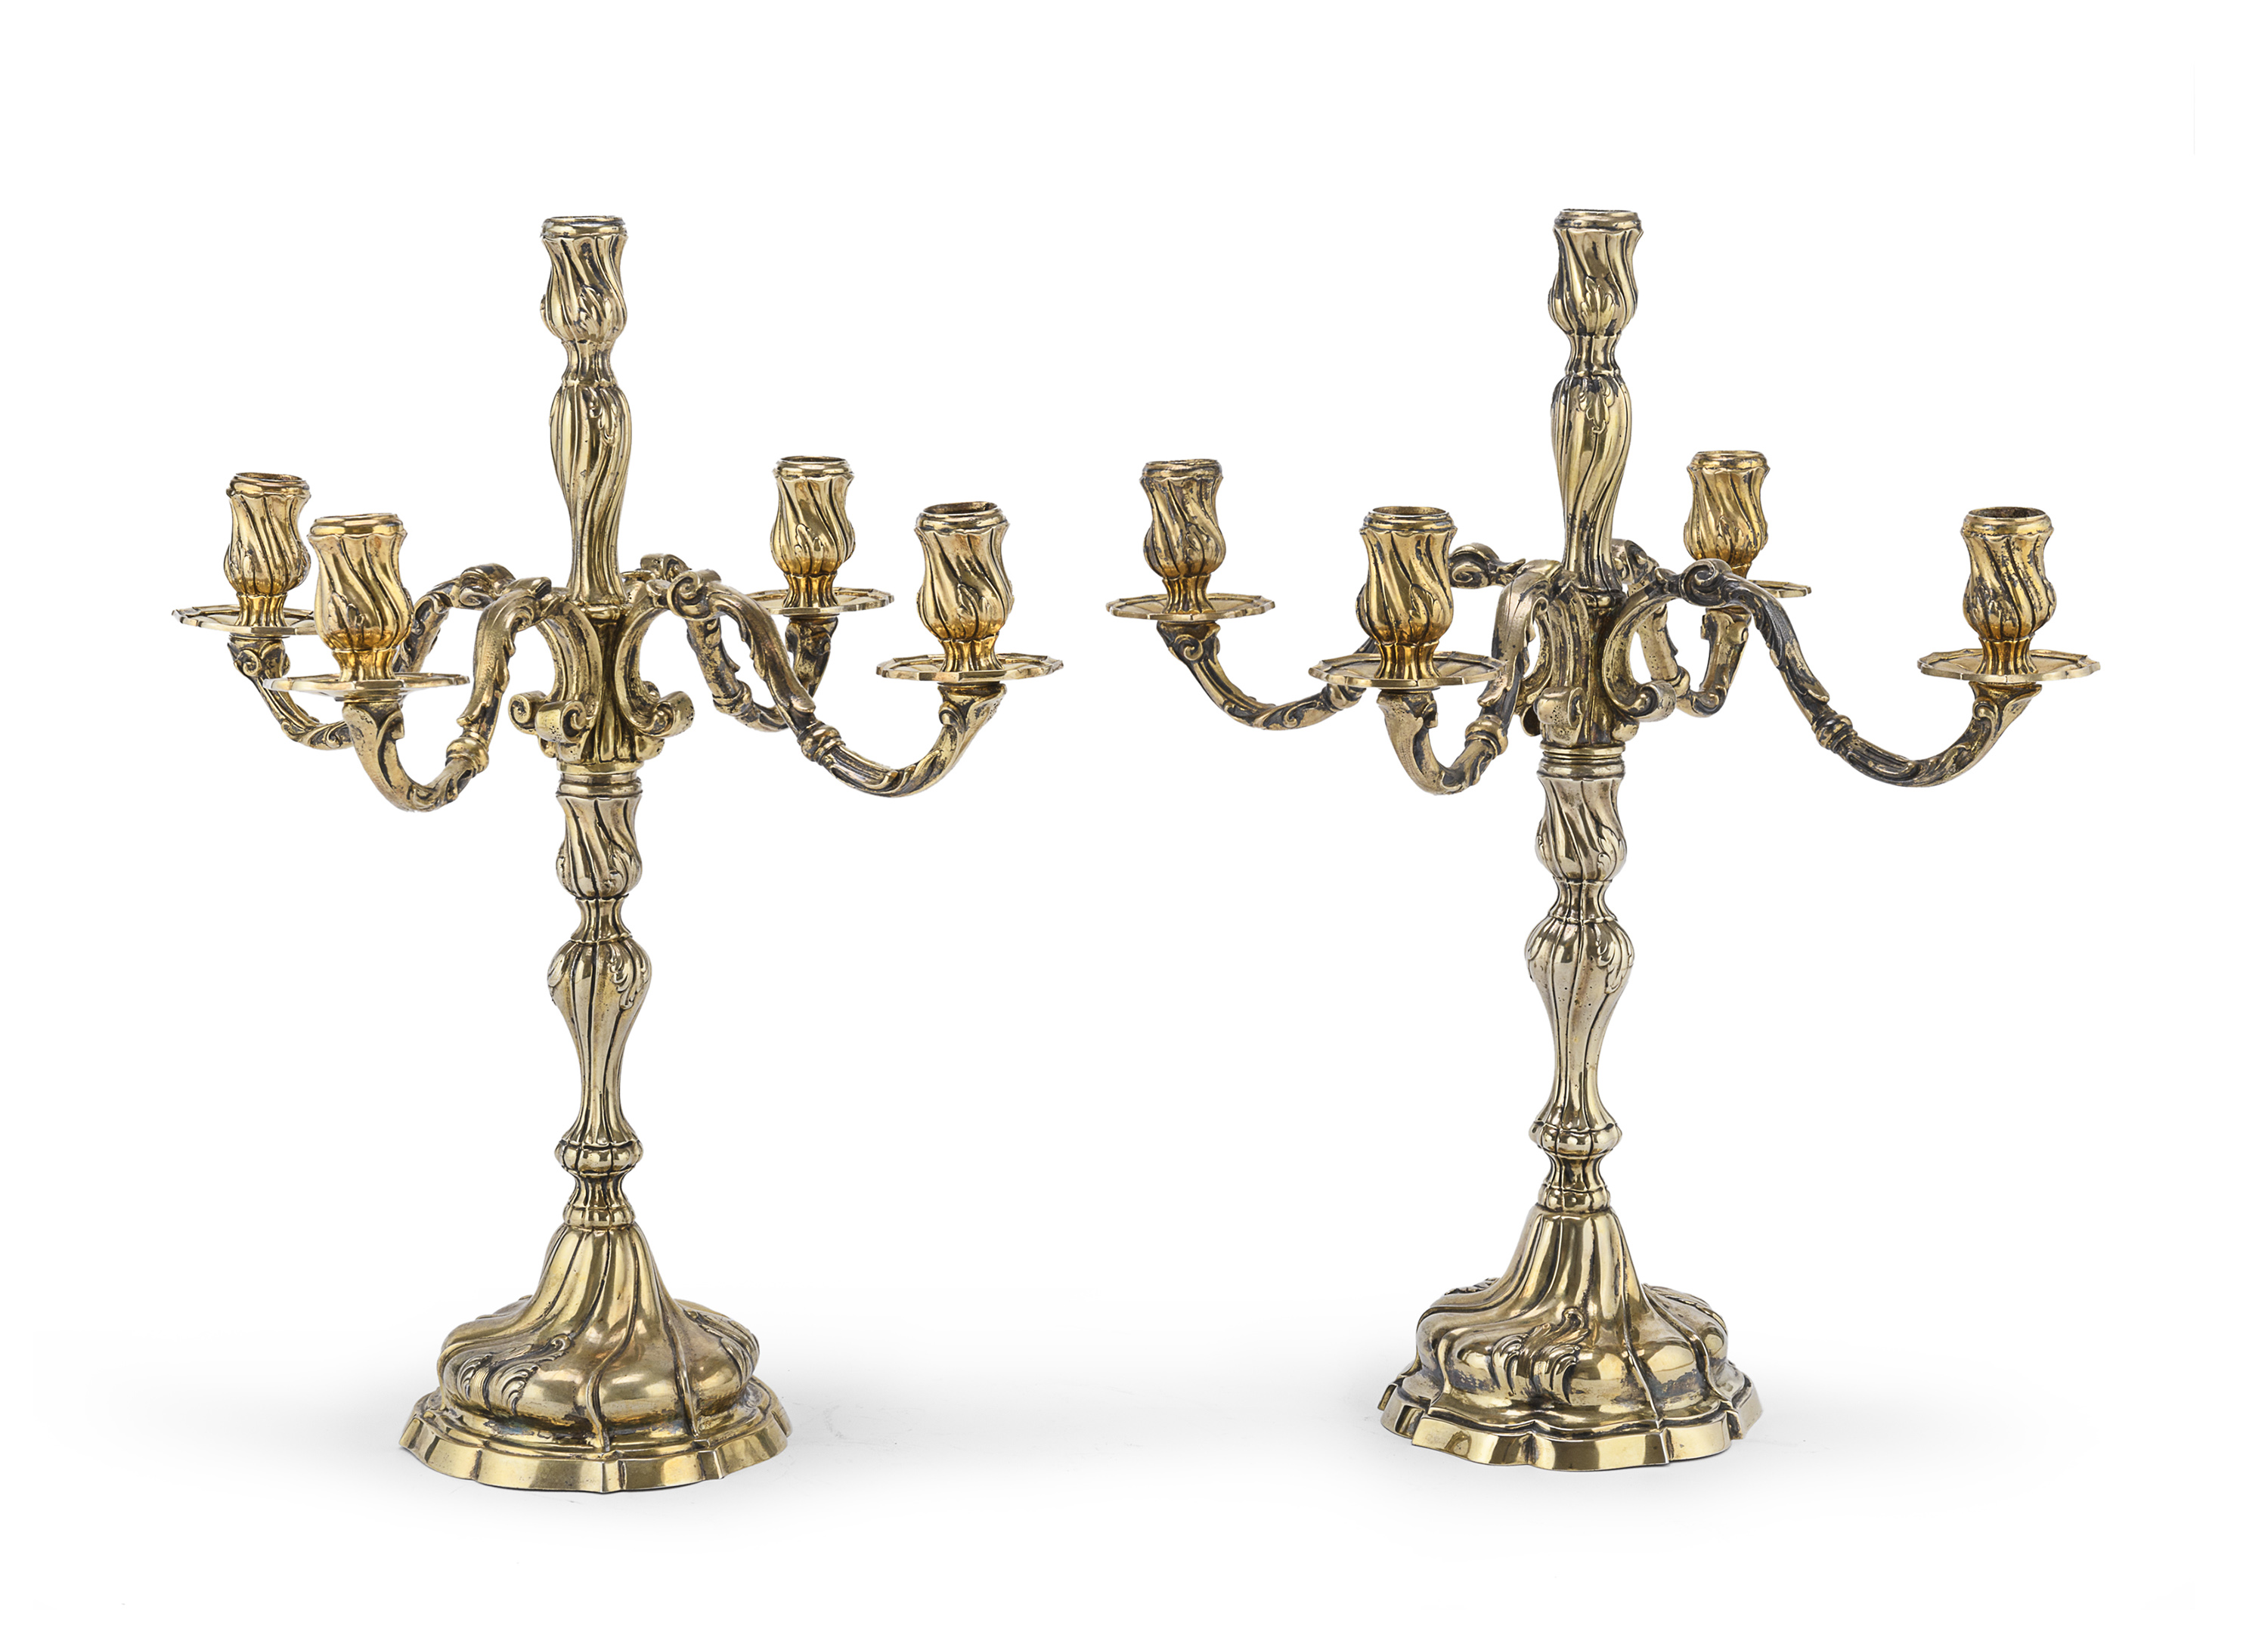 PAIR OF SILVER-GILT CANDELABRA ITALY LATE 19TH CENTURY